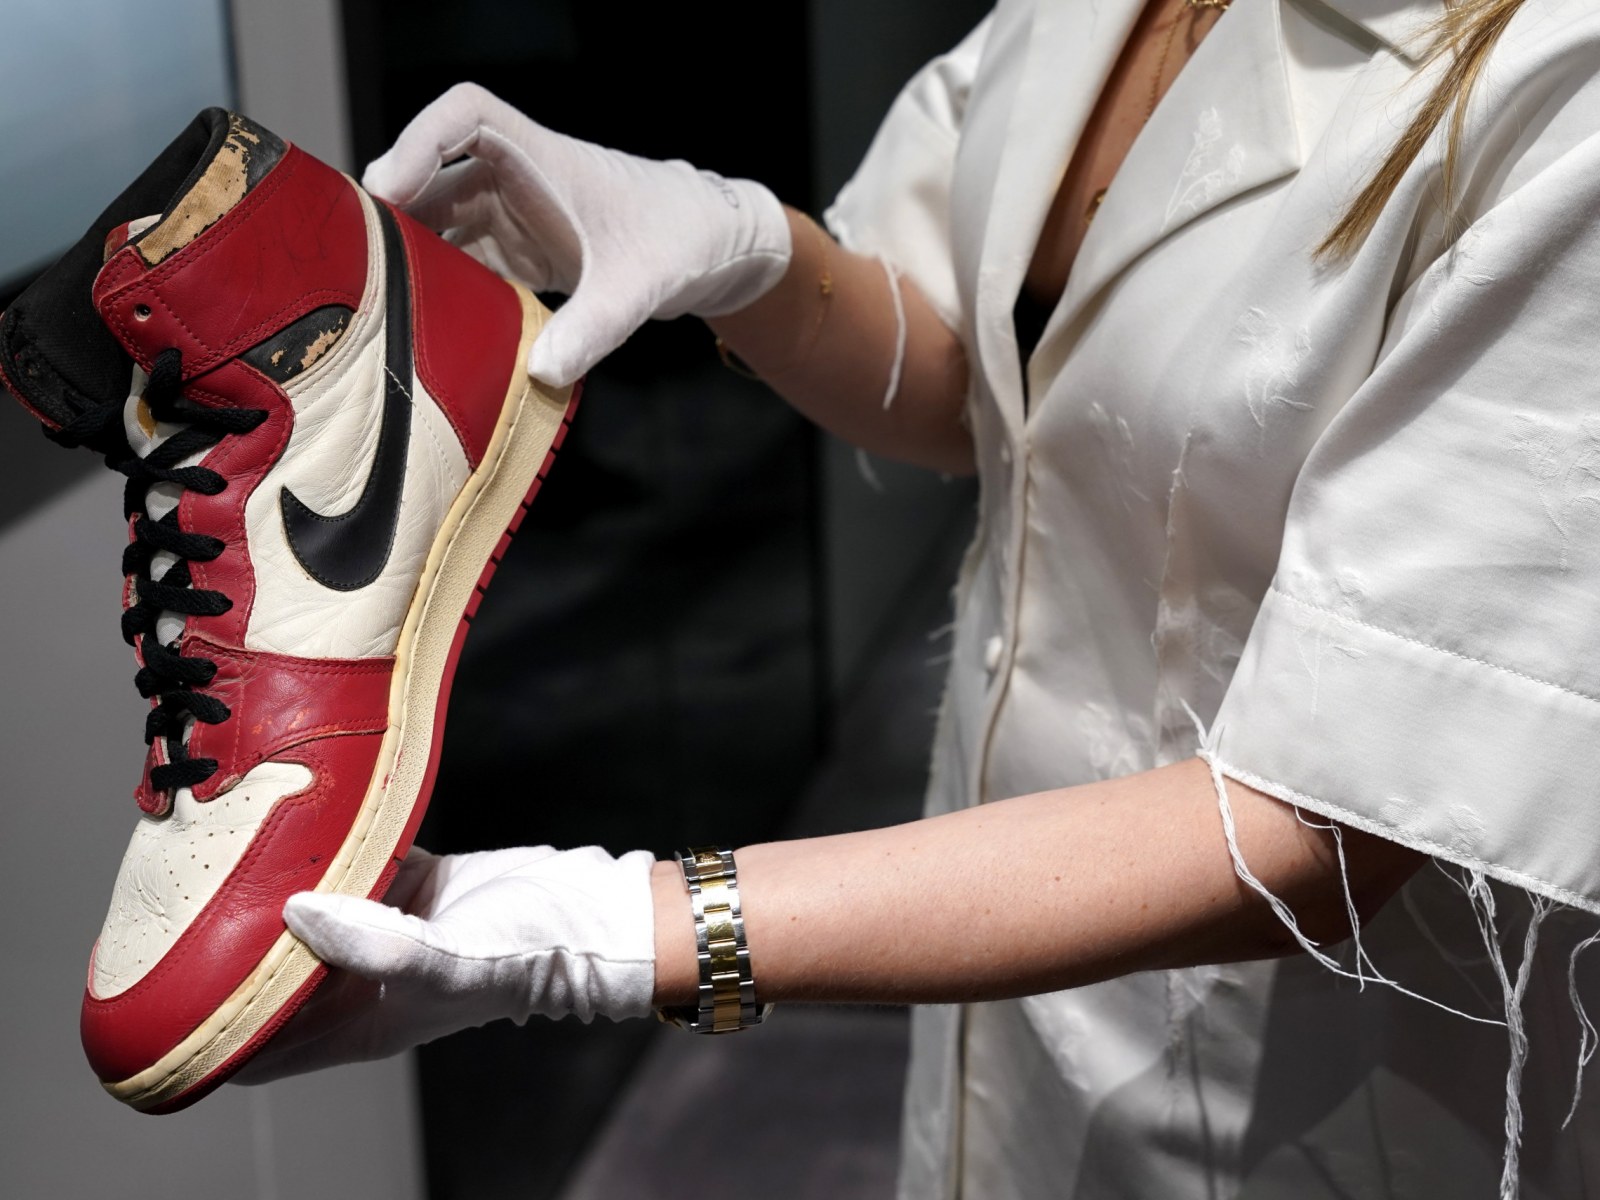 5 most expensive Air Jordan sneakers of all time